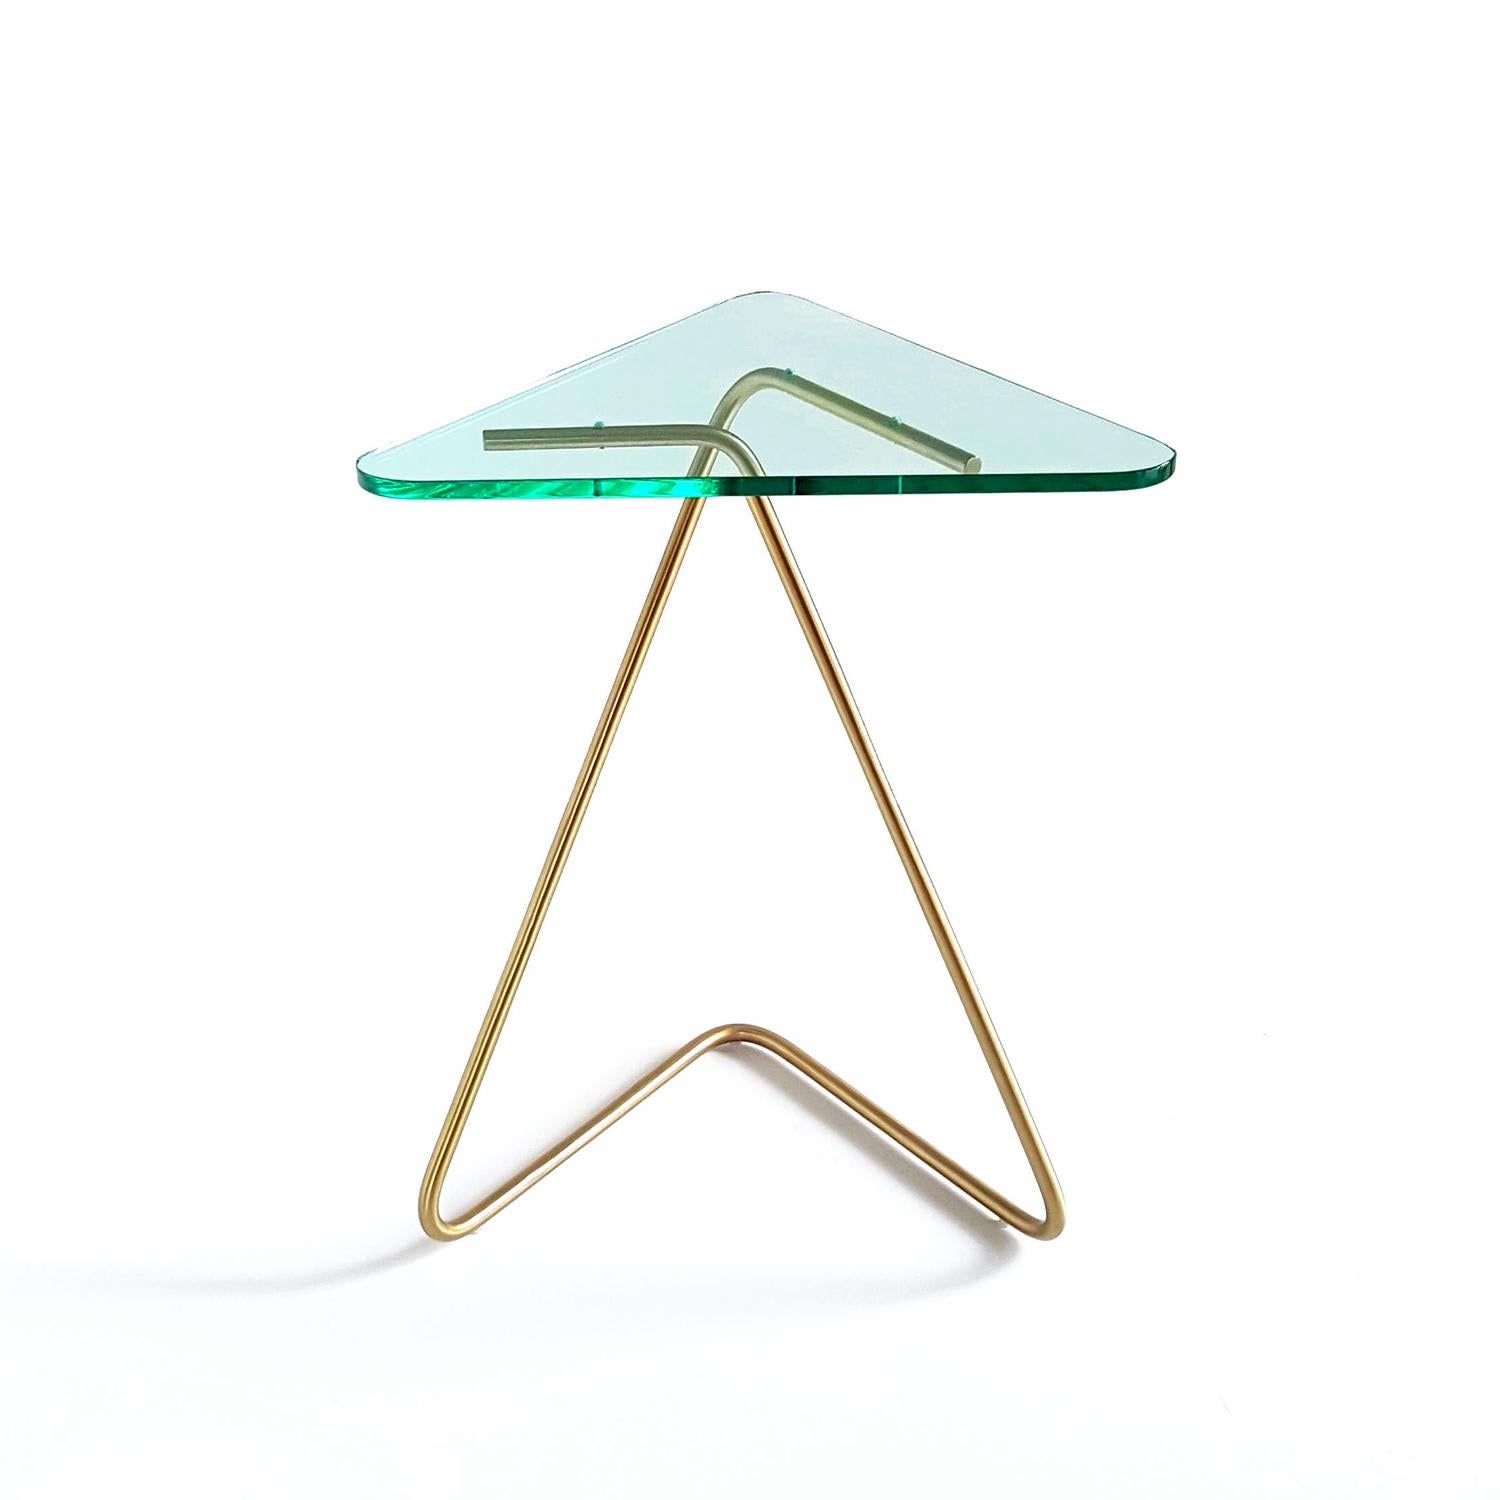 The triangle side table by Rita Kettaneh 
Dimensions: The base: brushed stainless steel plated with brass
 optionally plated with copper or brass
 The top: acrylic
Materials: H 49.5 x W 41 x D 9.5 cm
Weight: 2.6 Kg

Colors and